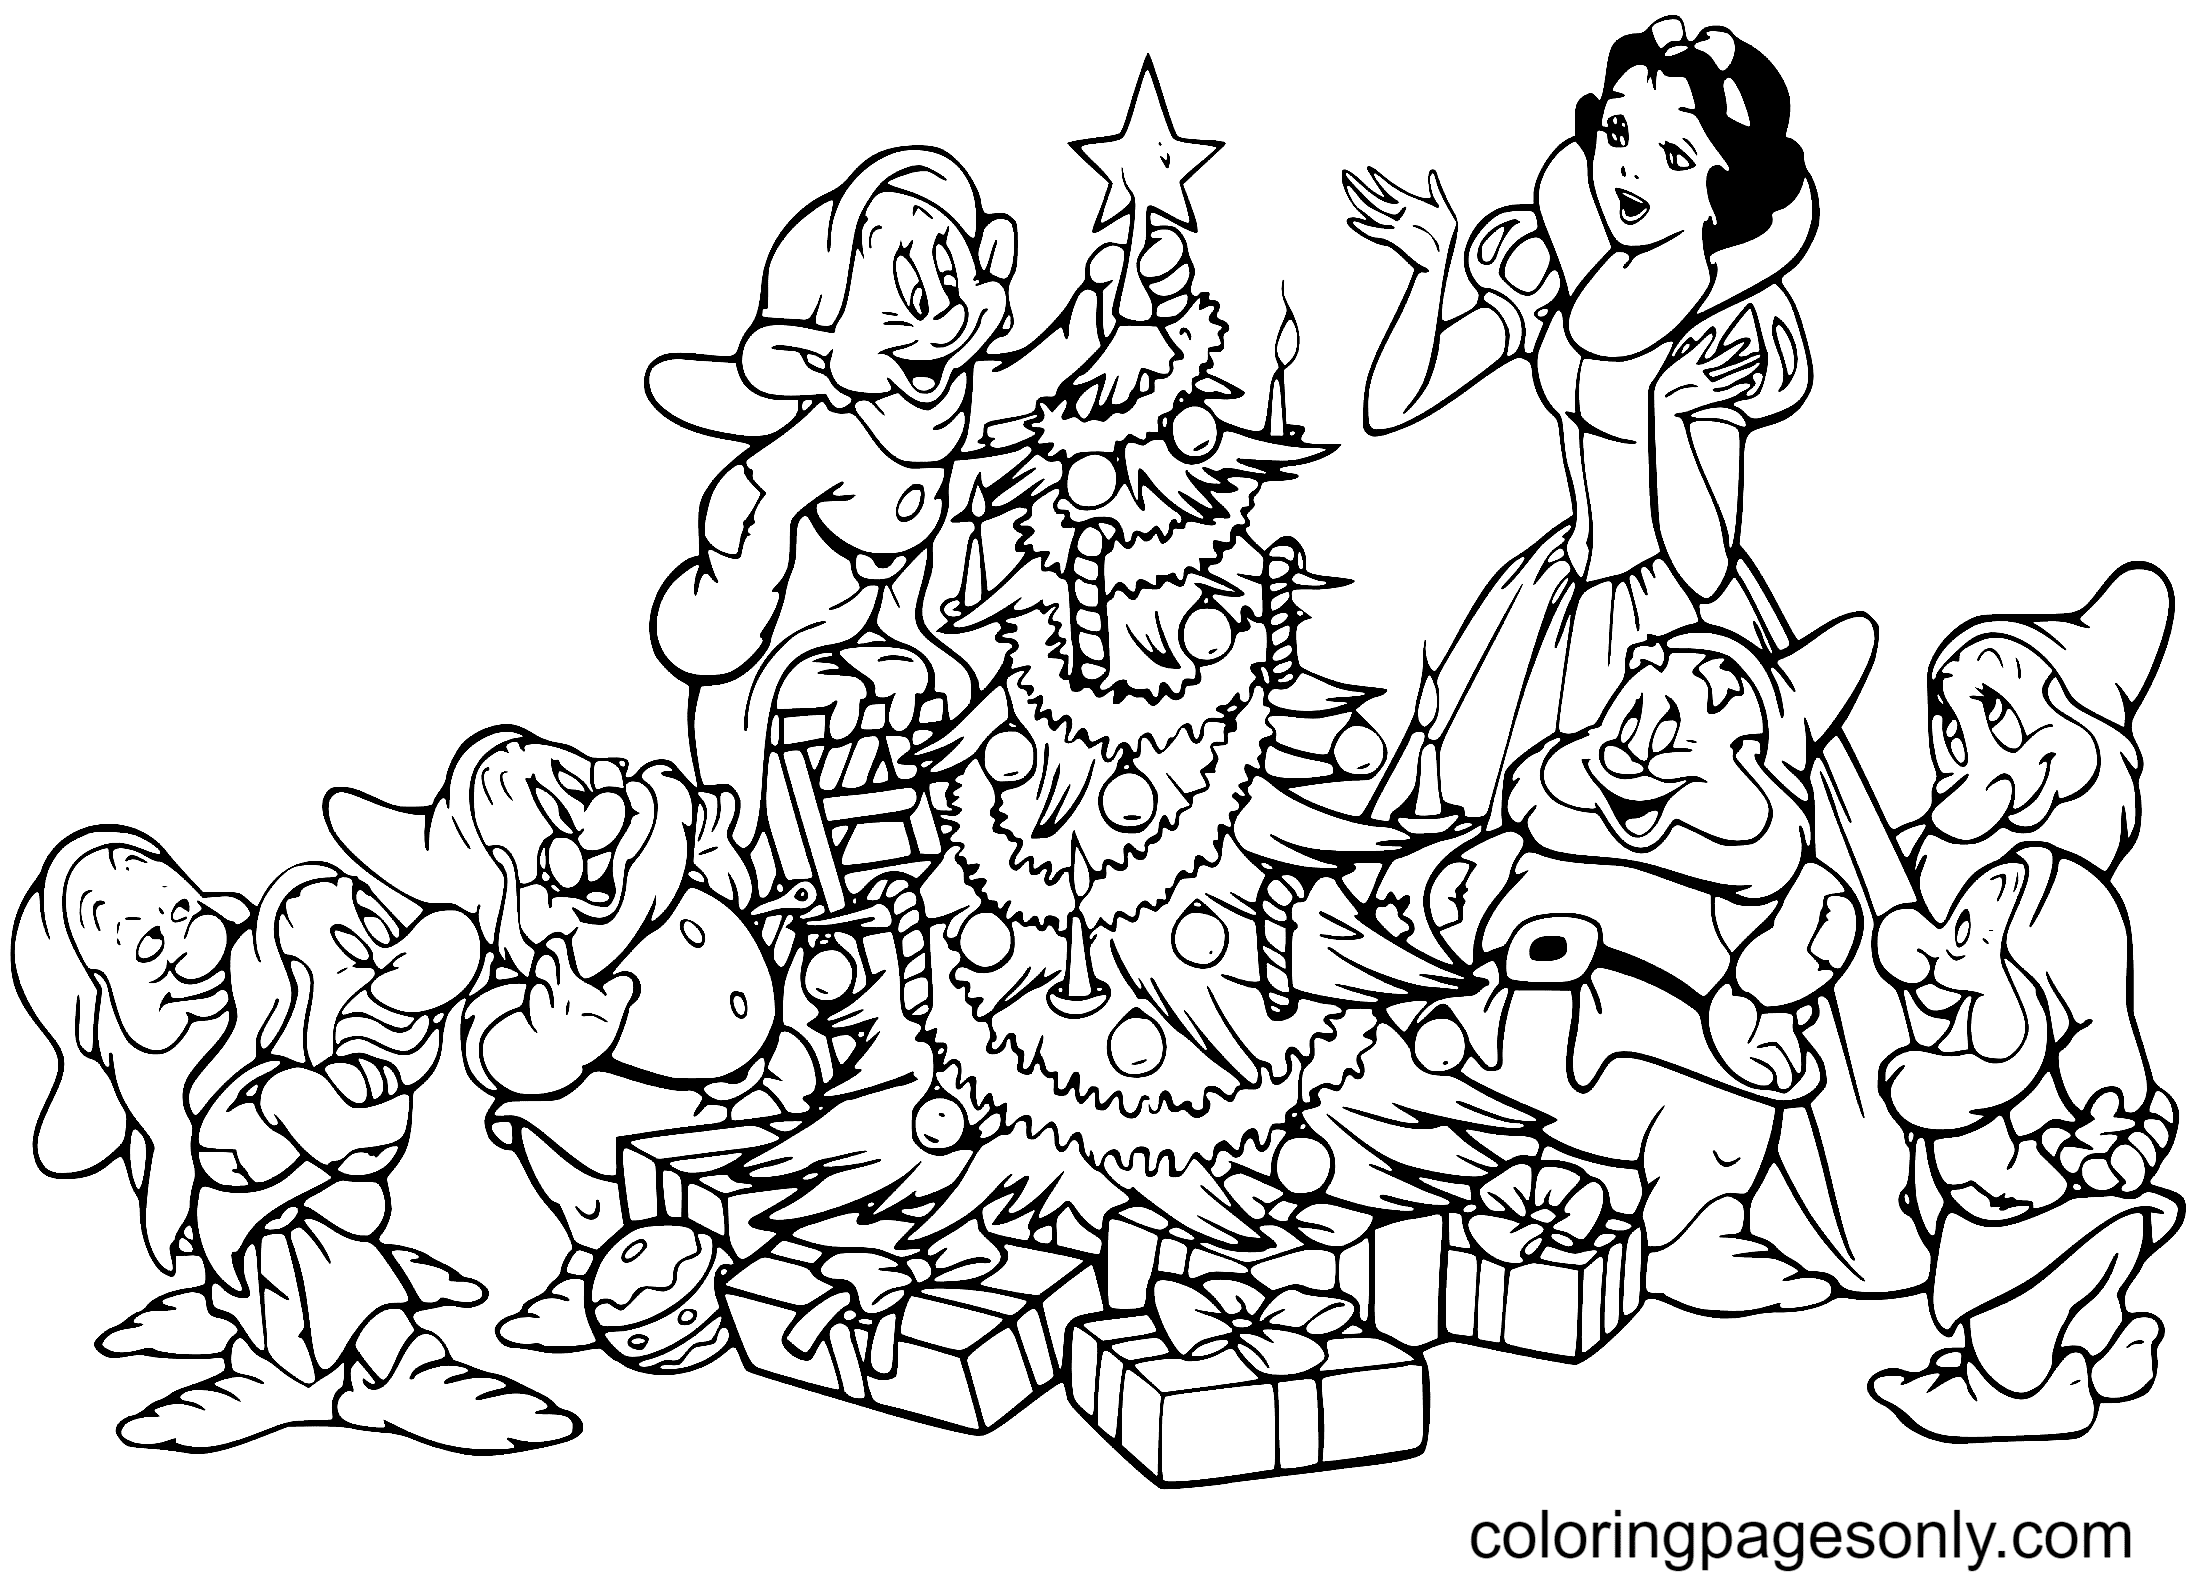 52  Coloring Pages Disney Christmas Tree  Latest